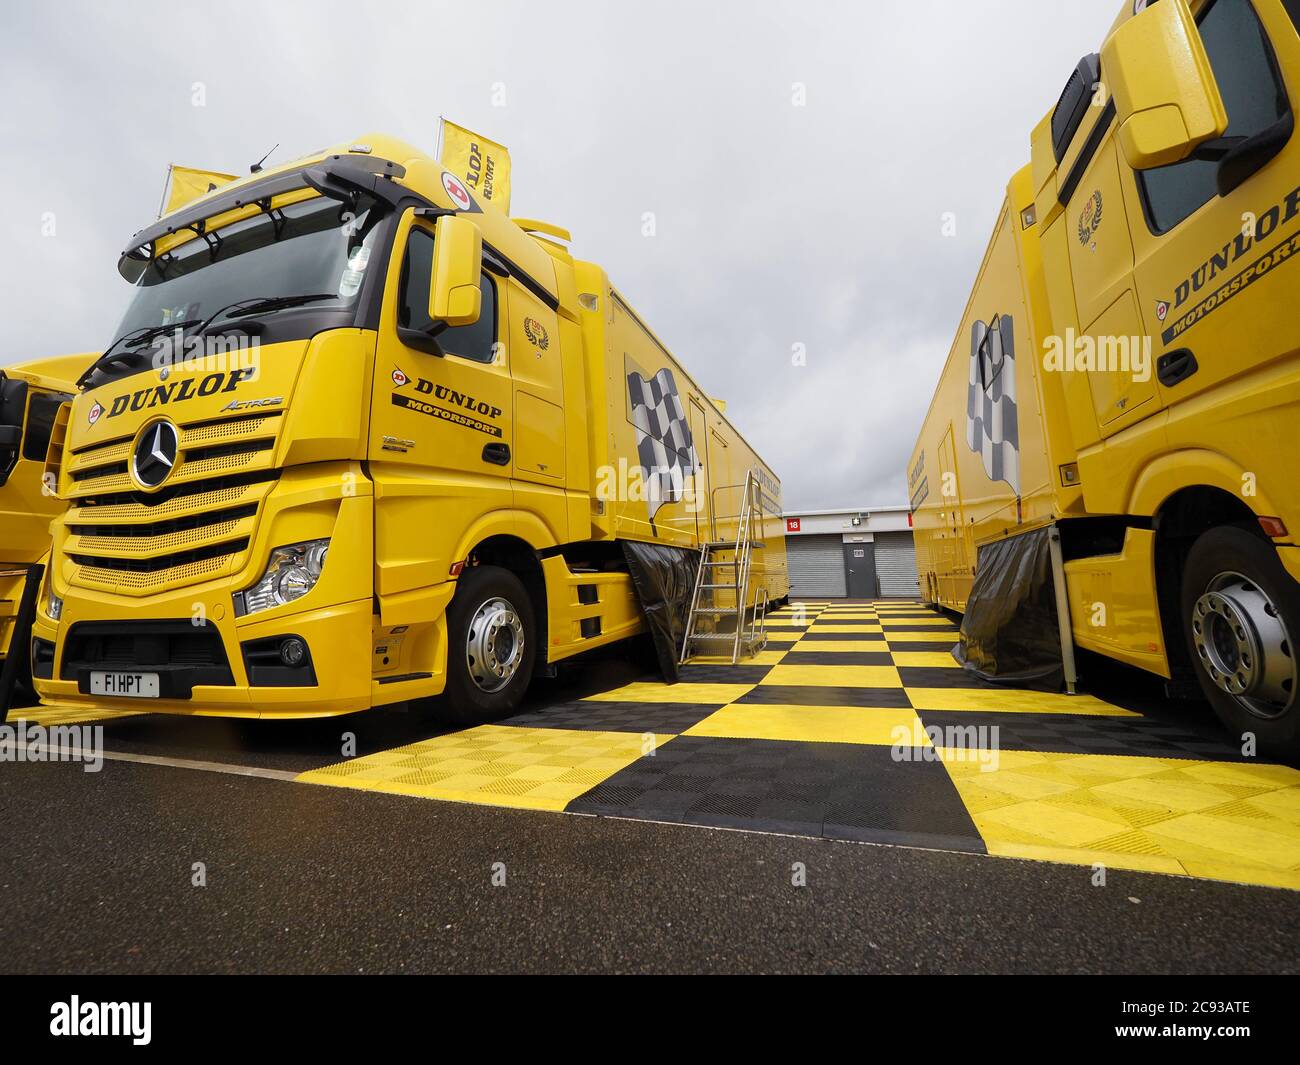 Dunlop Mercedes Benz Actros support trucks and trailer workshop parked in  the paddock at Silverstone race track during a Supermoto bike racing event  Stock Photo - Alamy